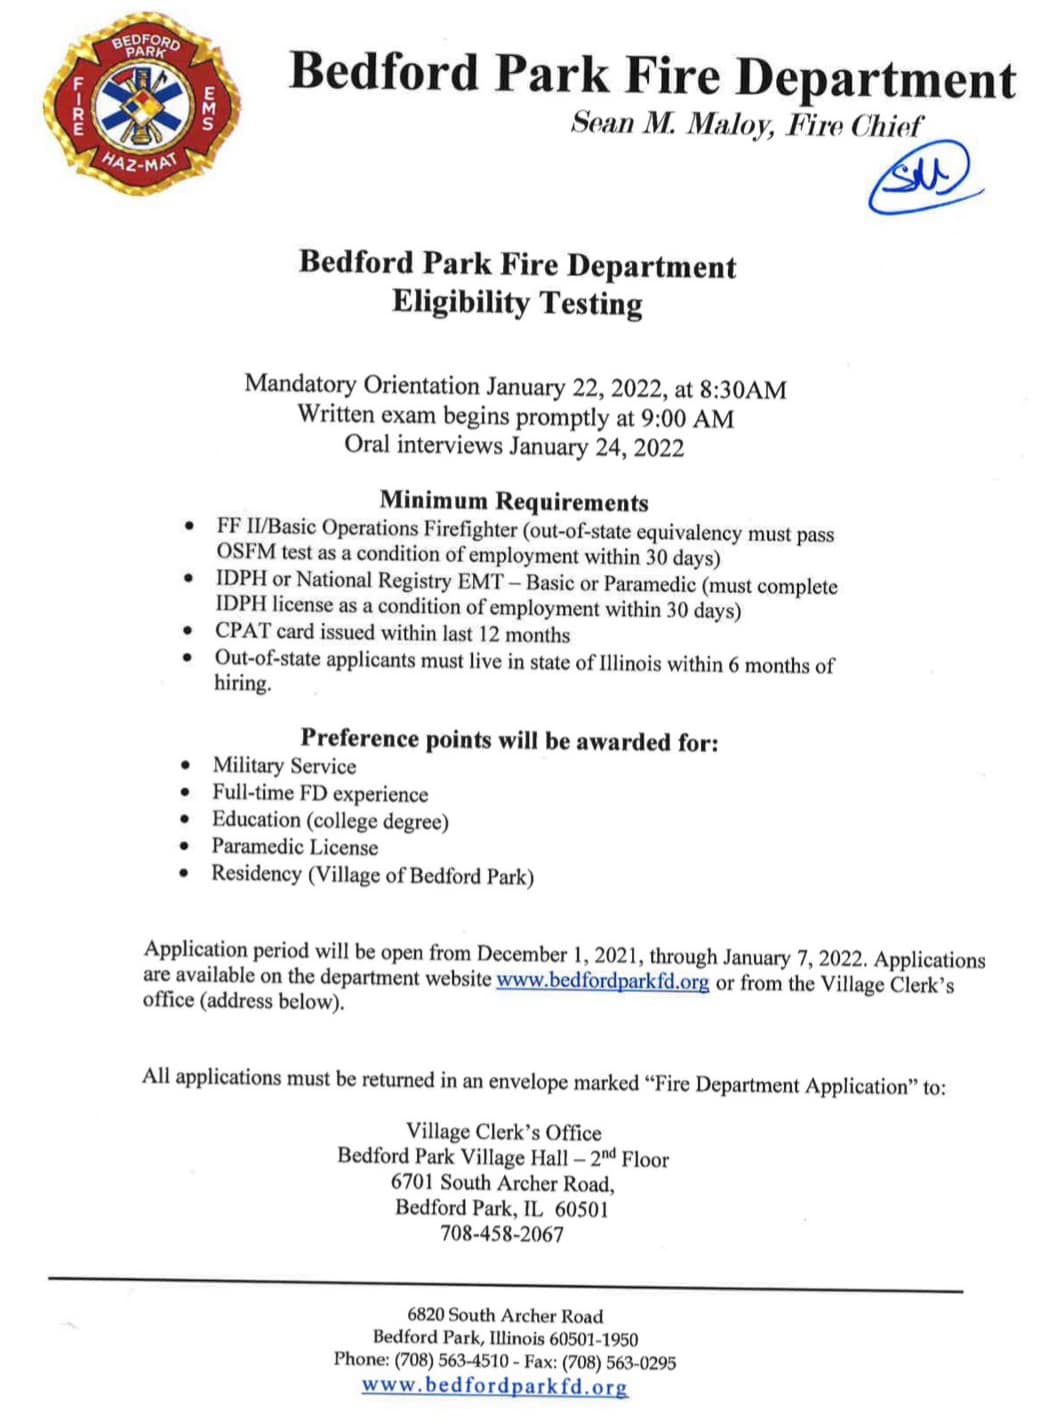 The Bedford Park FIre Department is hiring Firefighters